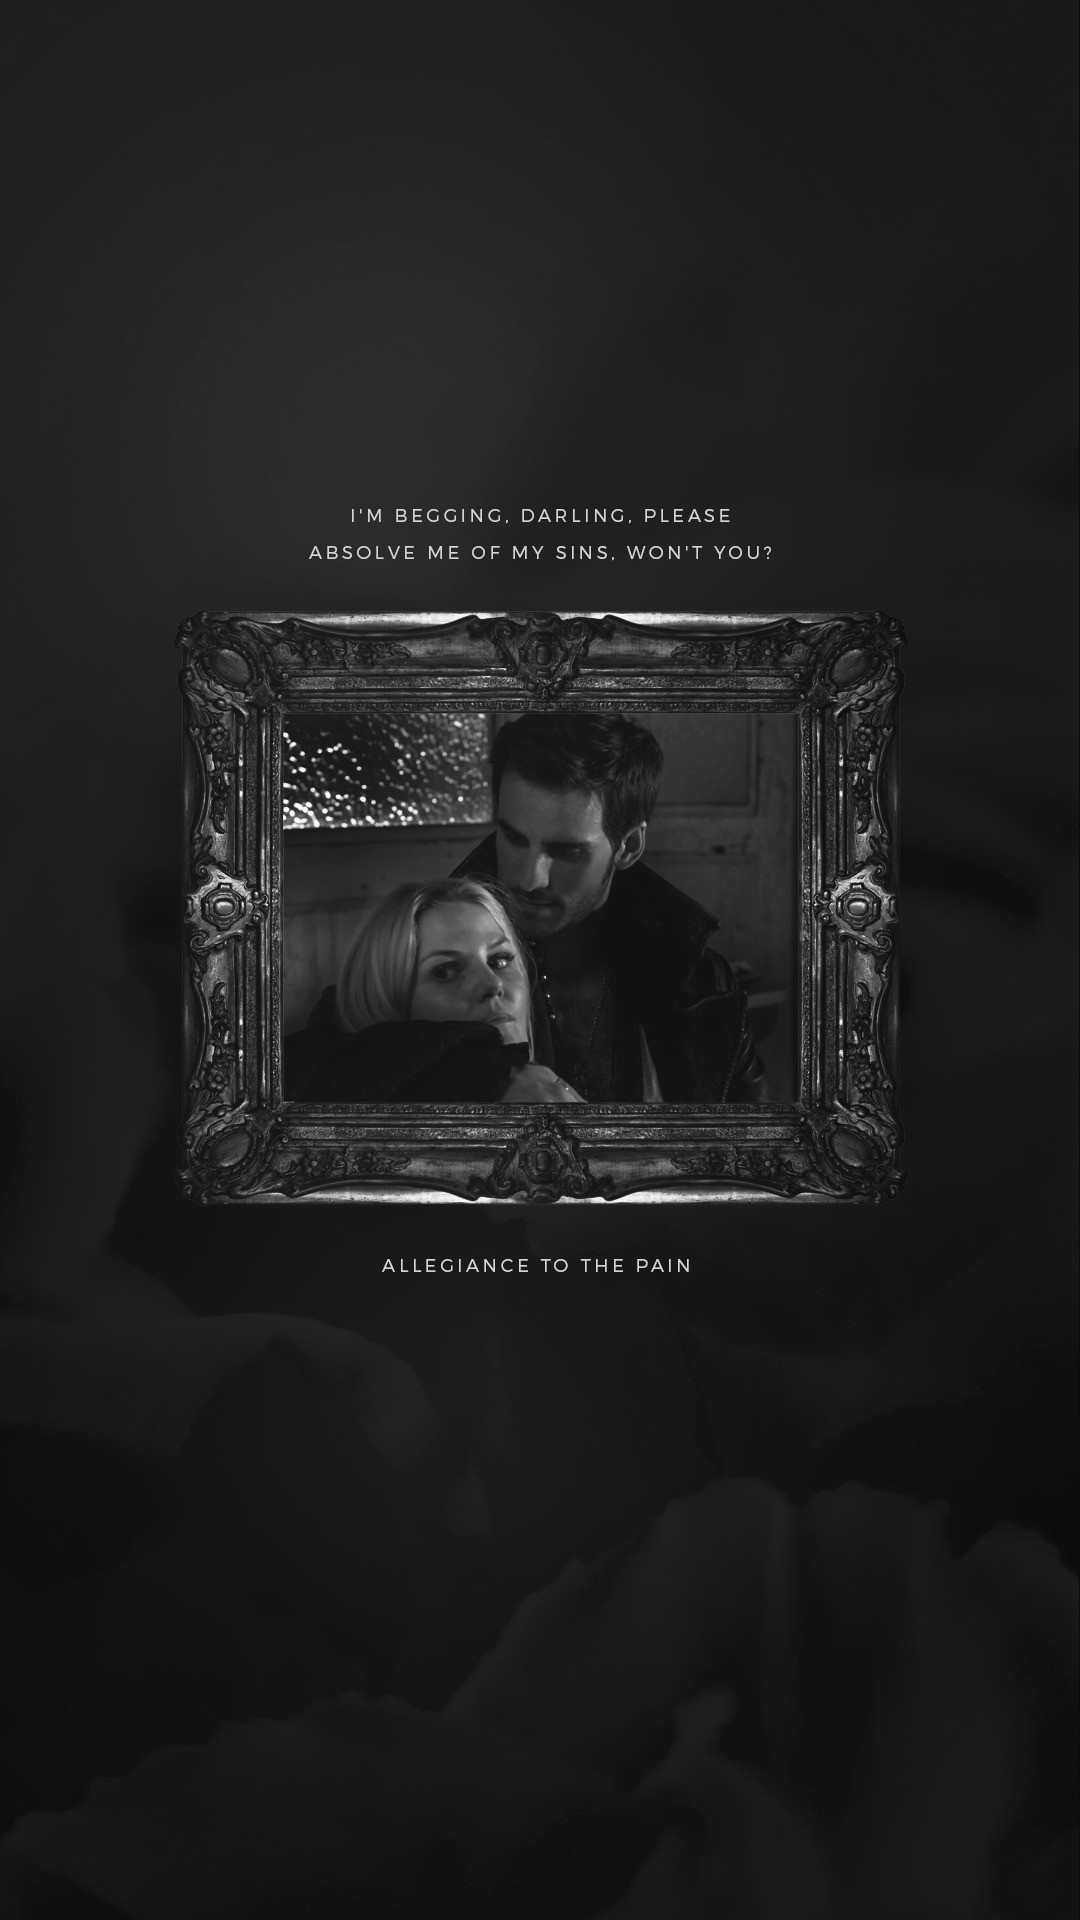 1080x1920 96 - captain swan locks + never be like you lyrics by flume. totally  inspired by this instagram feed/my quiet love for captain swan. no requests  for ...